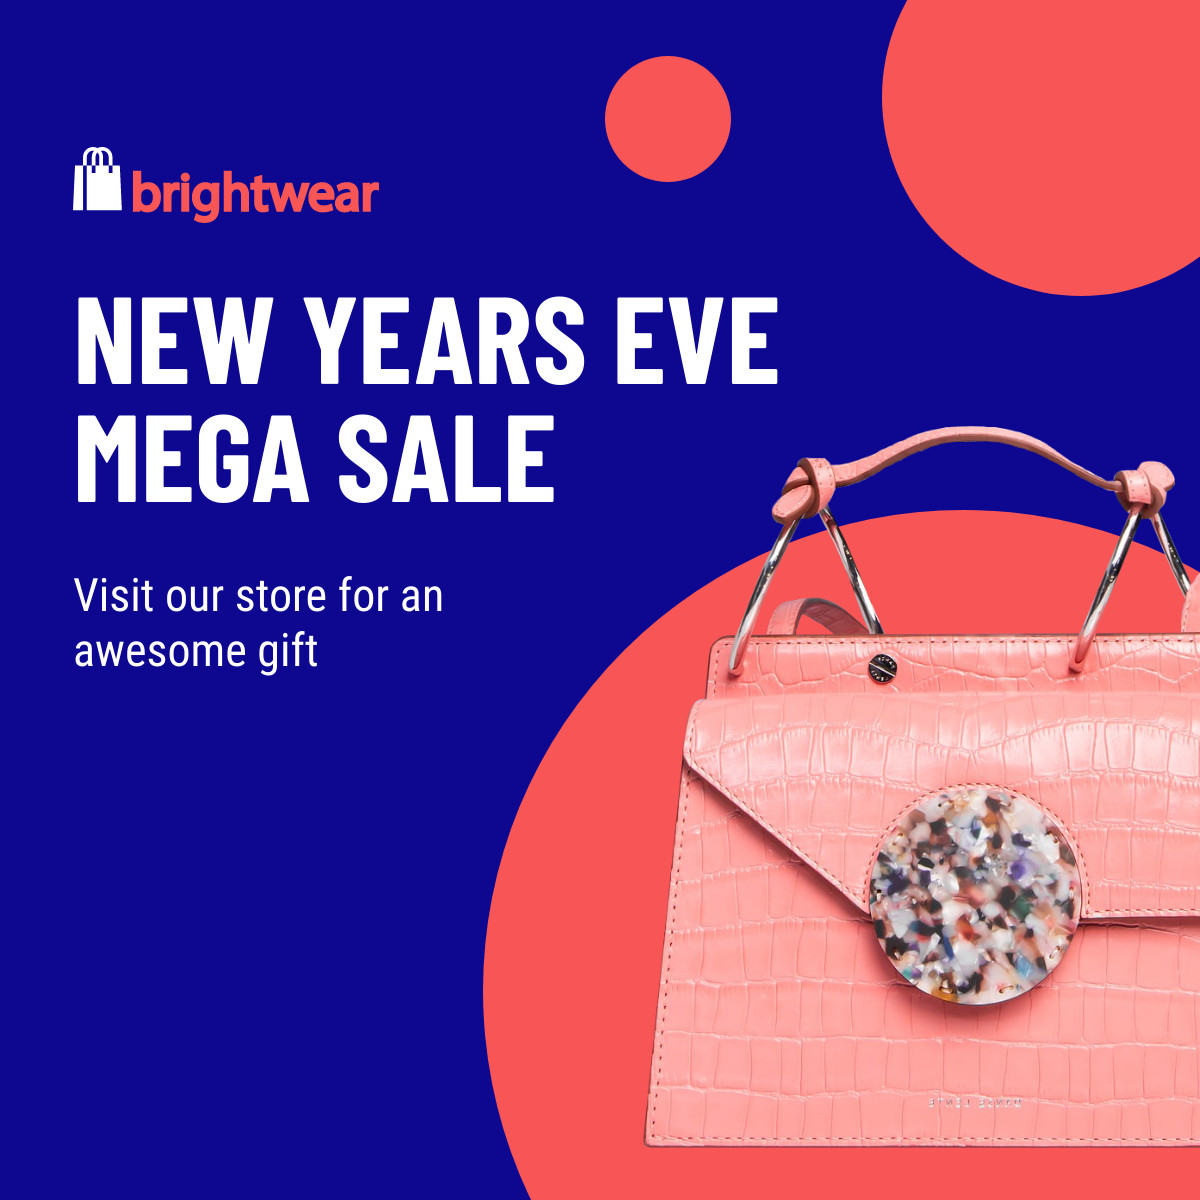 New Year Mega Sale with Awesome Gift